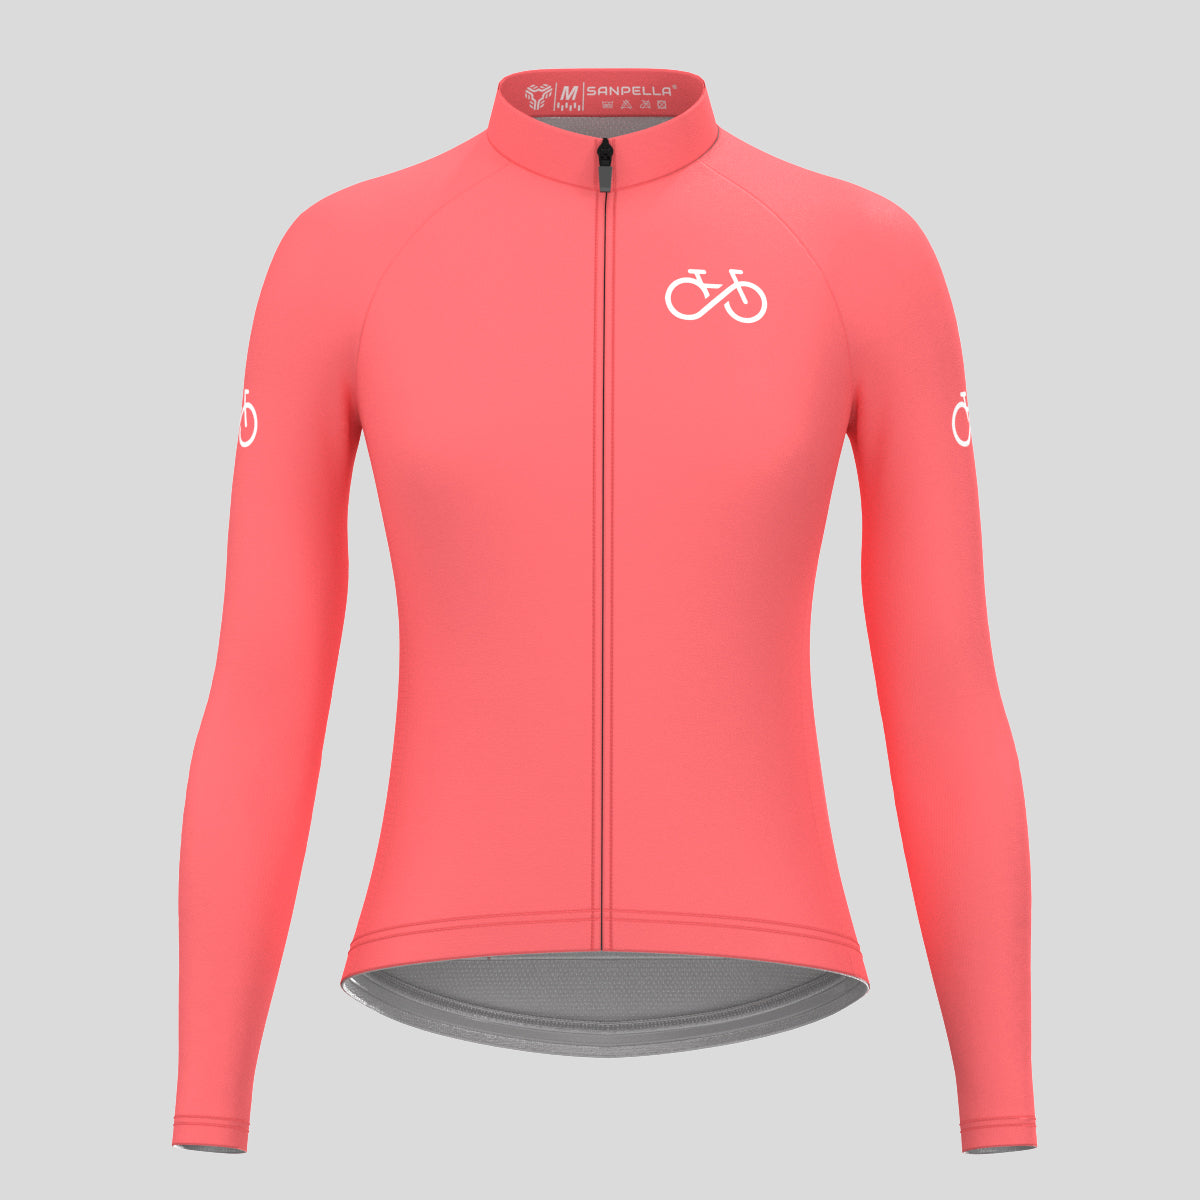 Ride Forever Women's LS Cycling Jersey - Guava